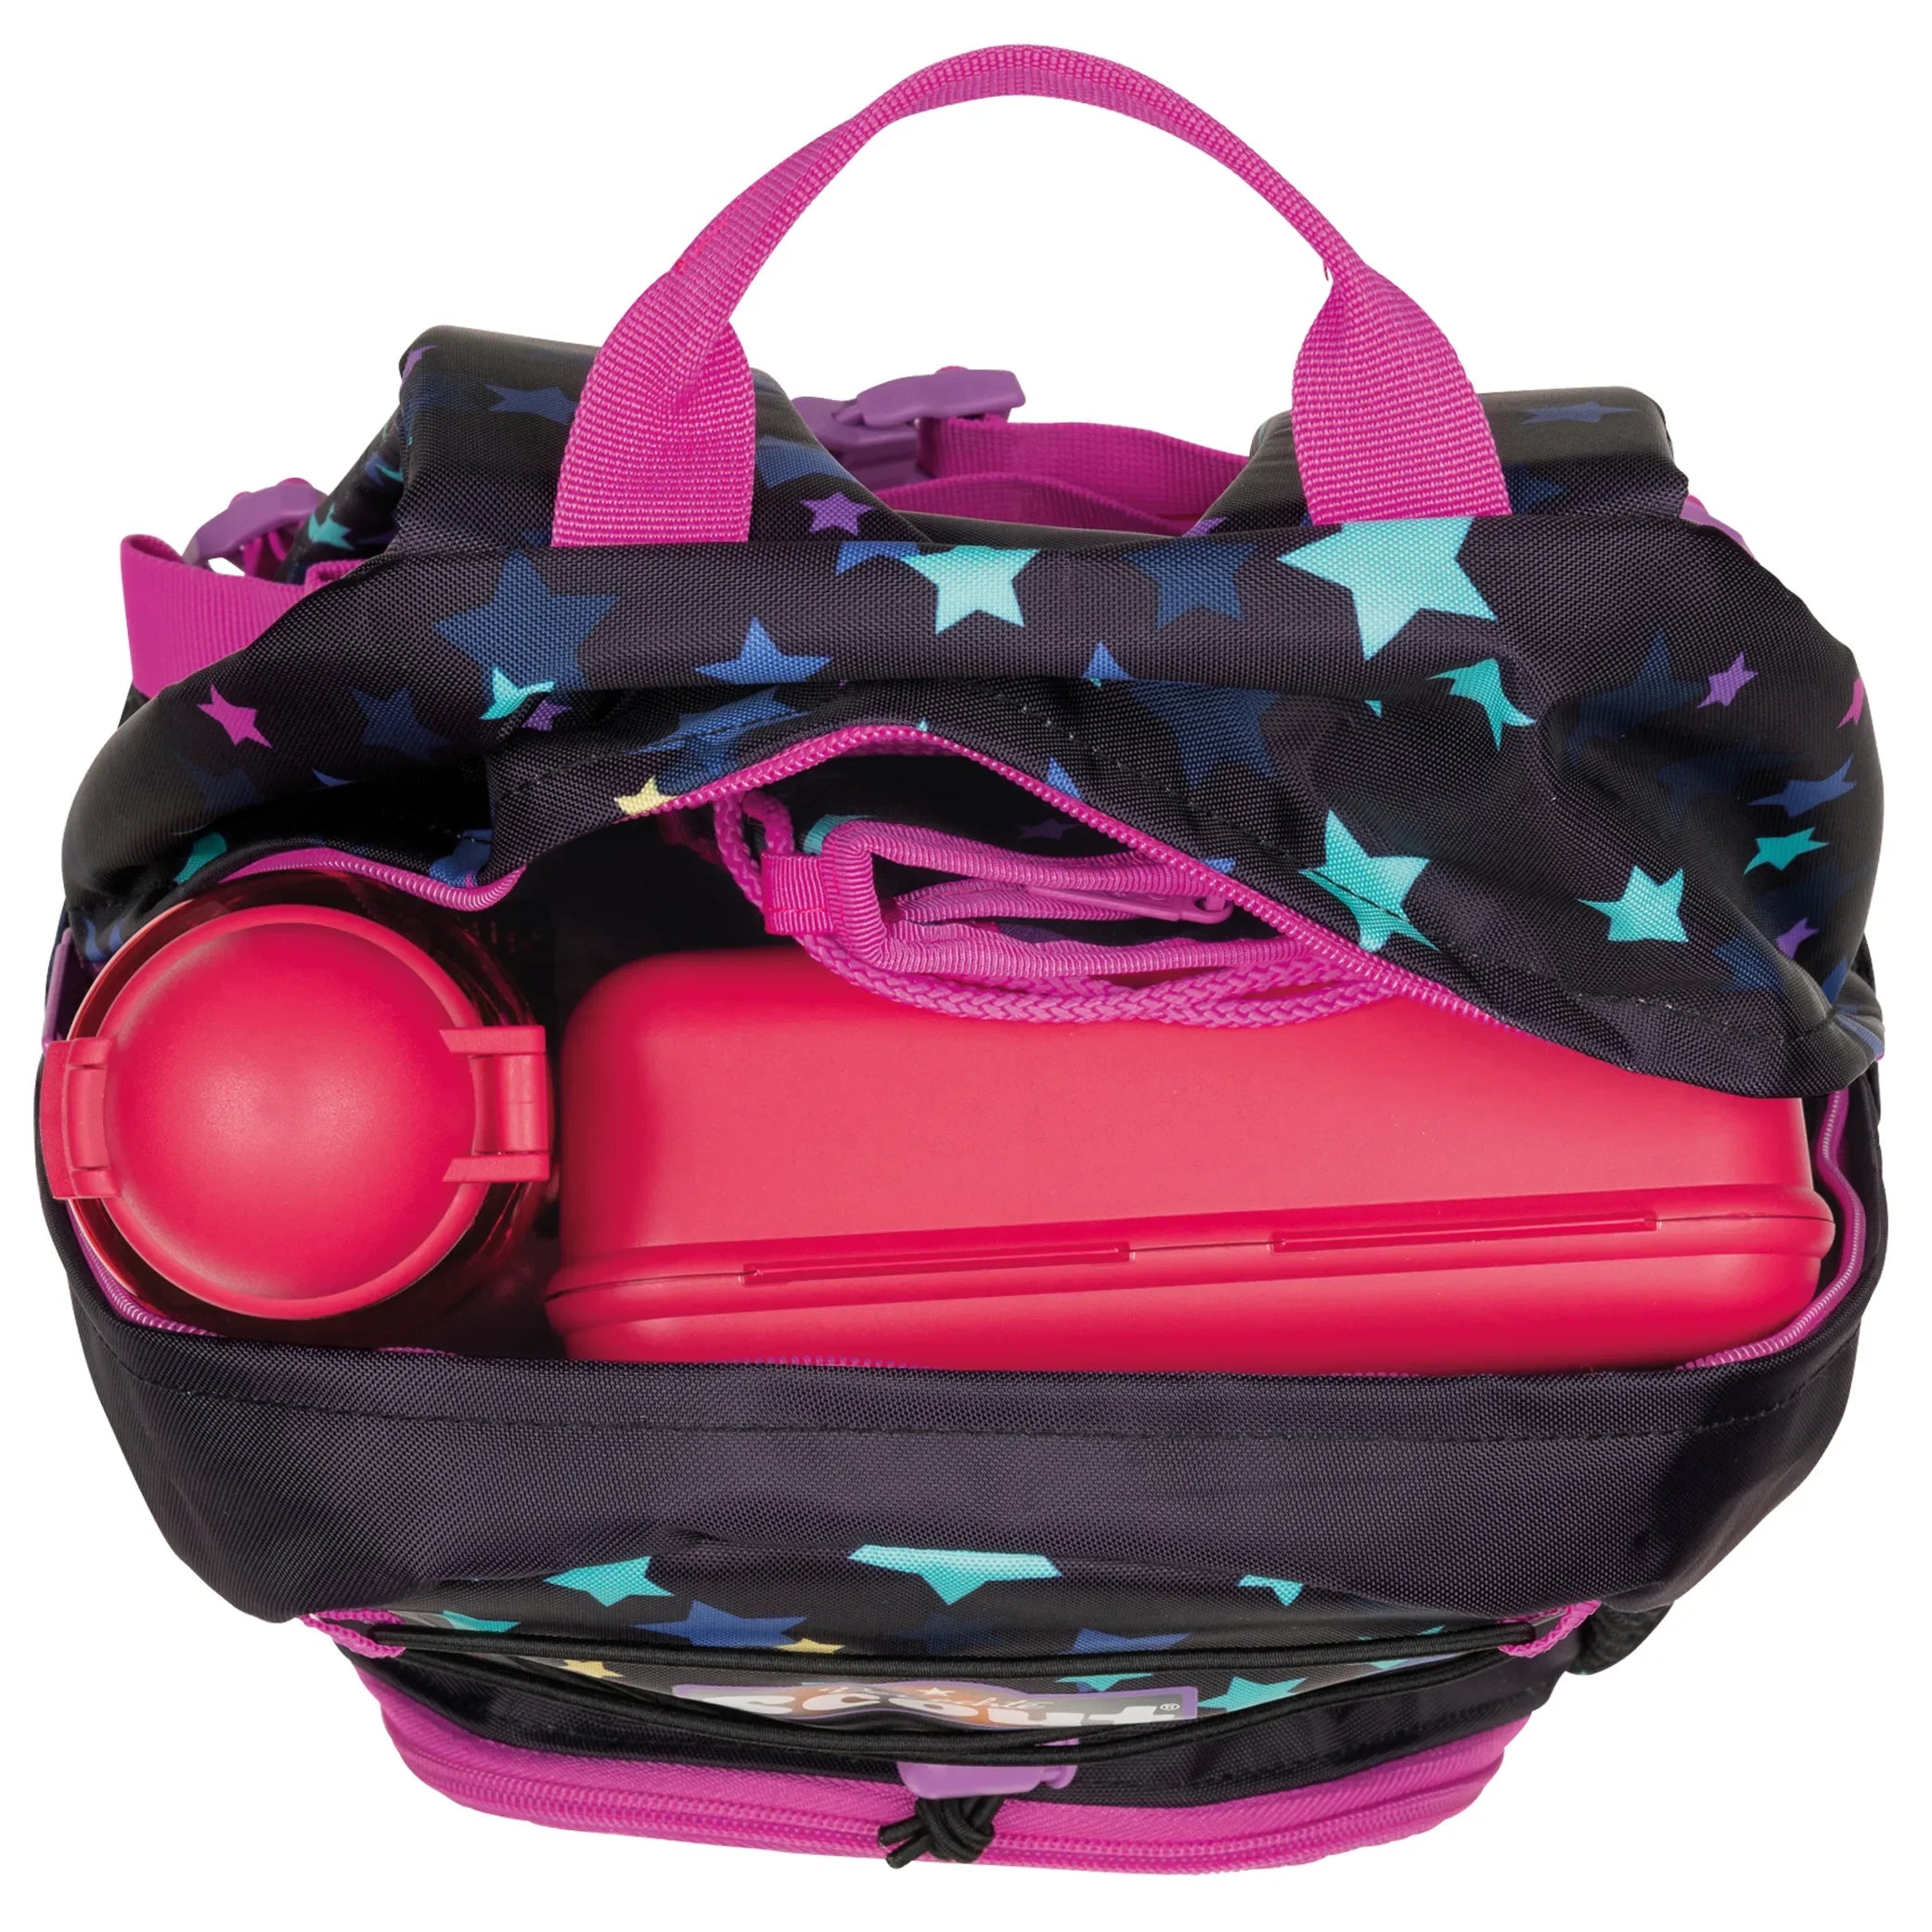 Scout Basic backpack VI 35 cm - dolphins